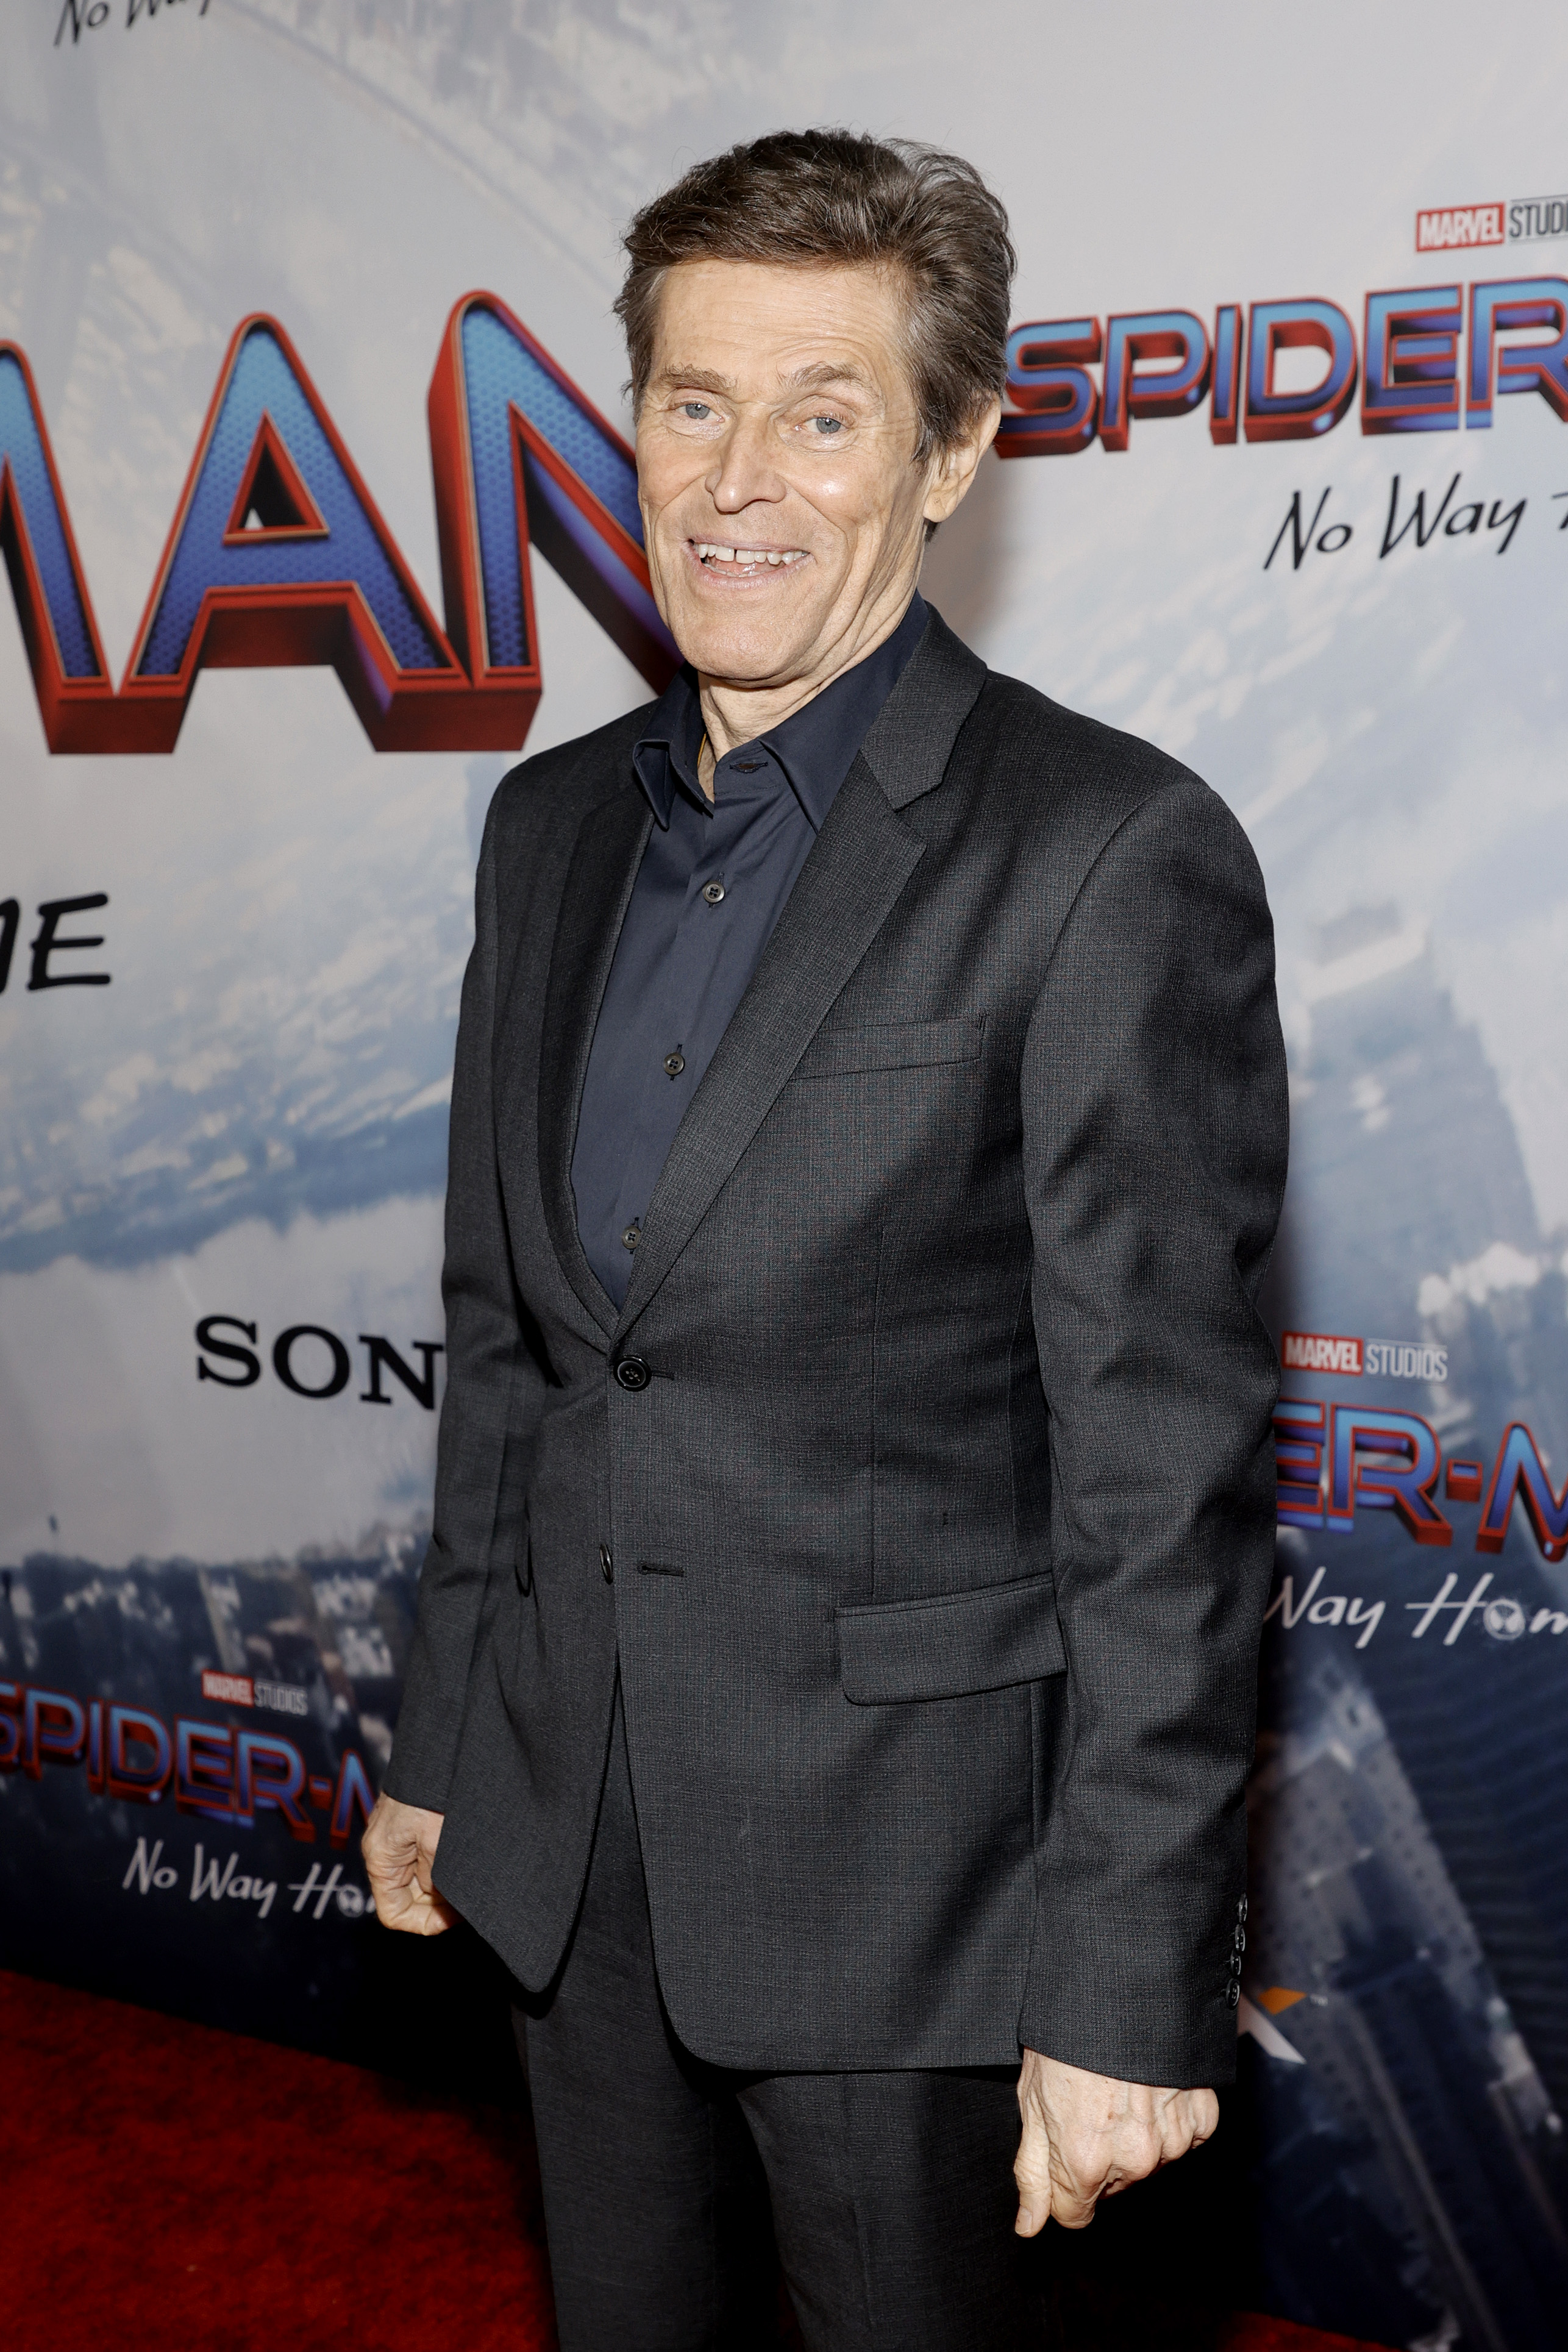 Willem Dafoe at an event for Spider-Man: No Way Home (2021)